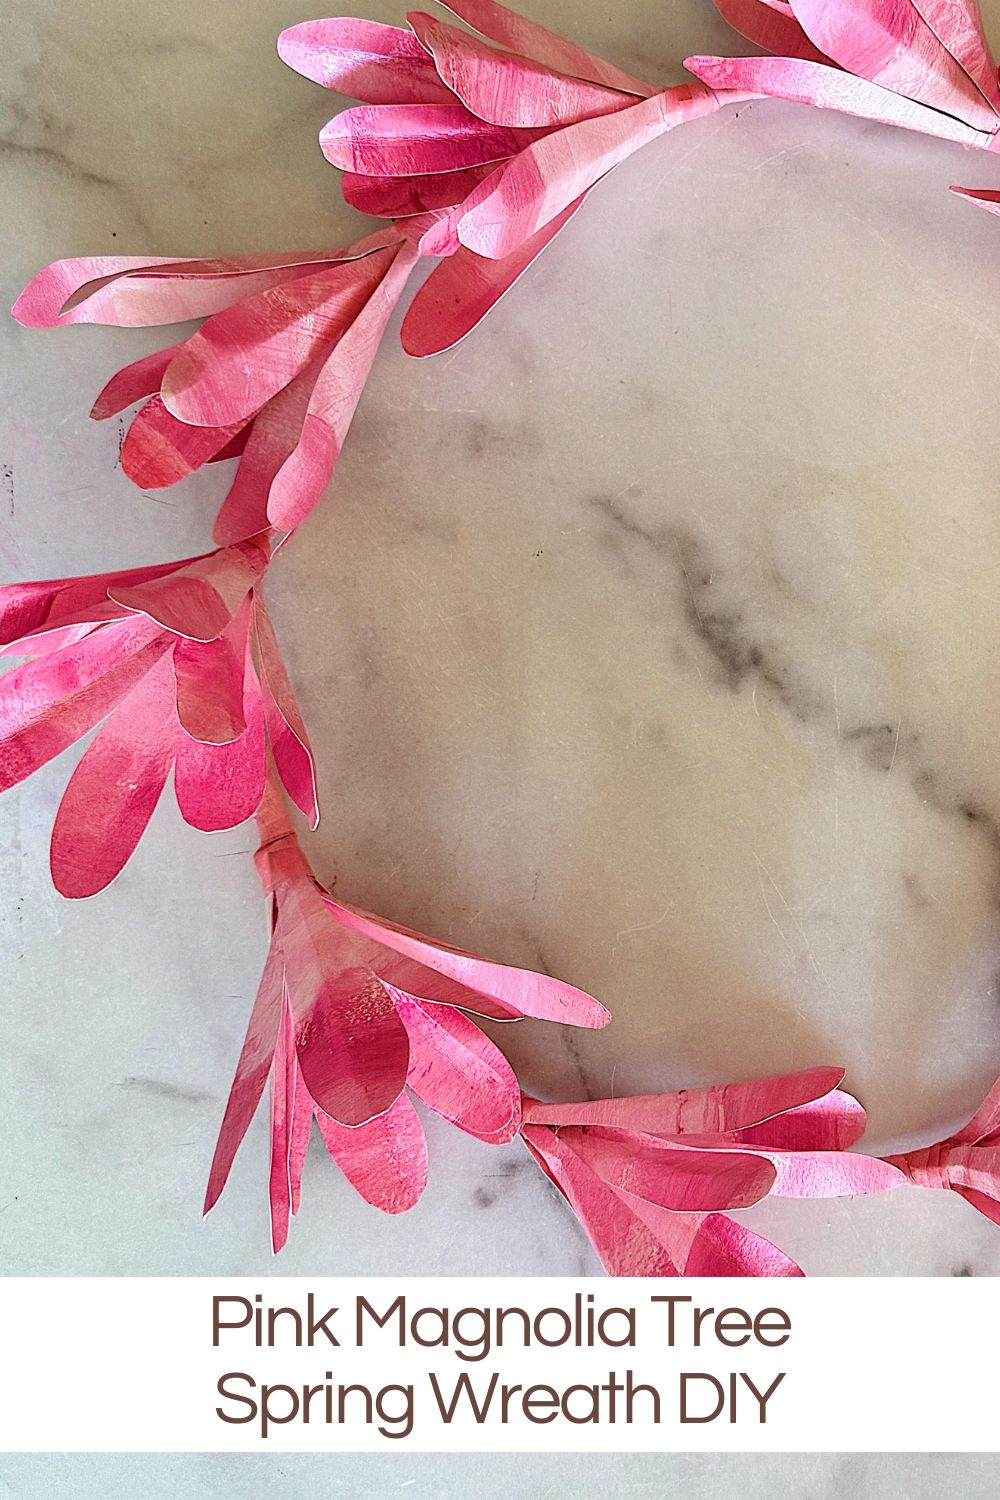 I started my spring crafting marathon this week, and today, I am sharing my first completed project - a Pink Magnolia Tree Spring Wreath.